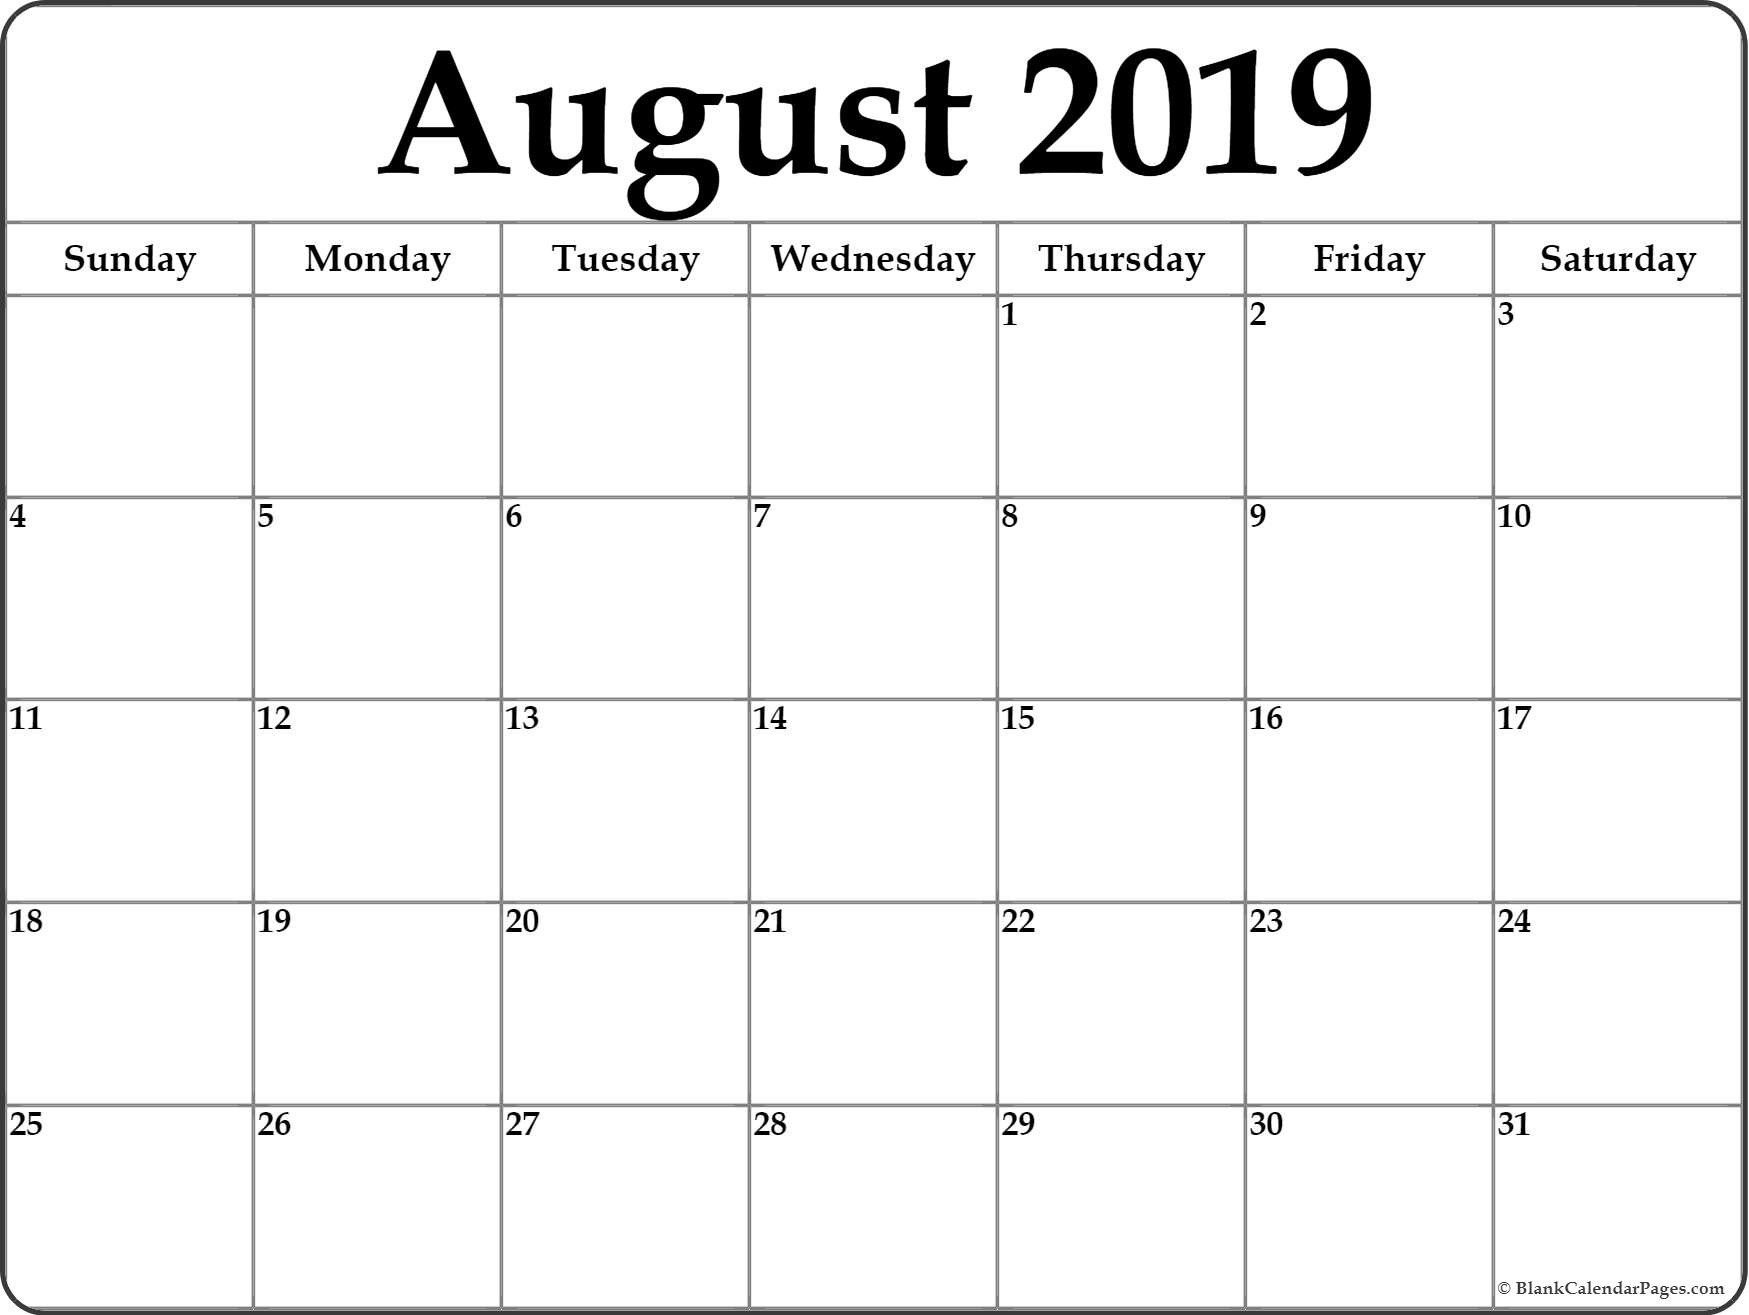 August 2019 Calendar | Free Printable Monthly Calendars-Printable Monthly At A Glance Calendar